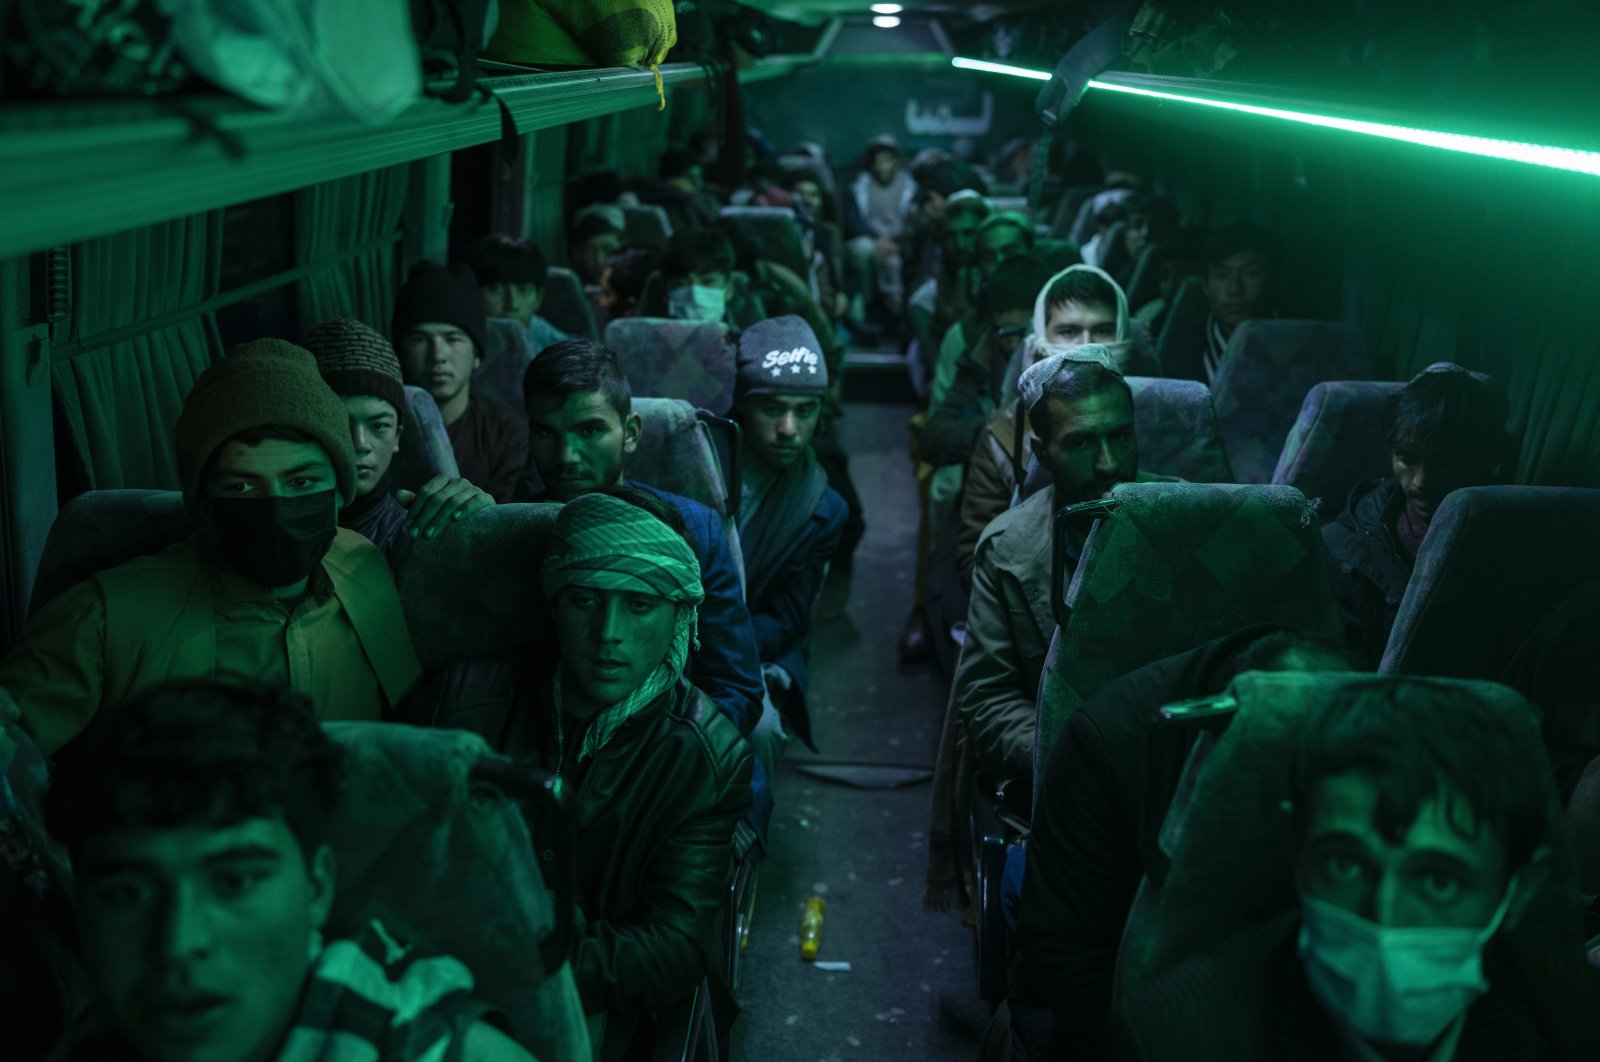 Afghan men sit in a bus for a 300-mile trip south to Nimrooz near the Iranian border, in Herat, Afghanistan, Nov. 22, 2021. (AP Photo)